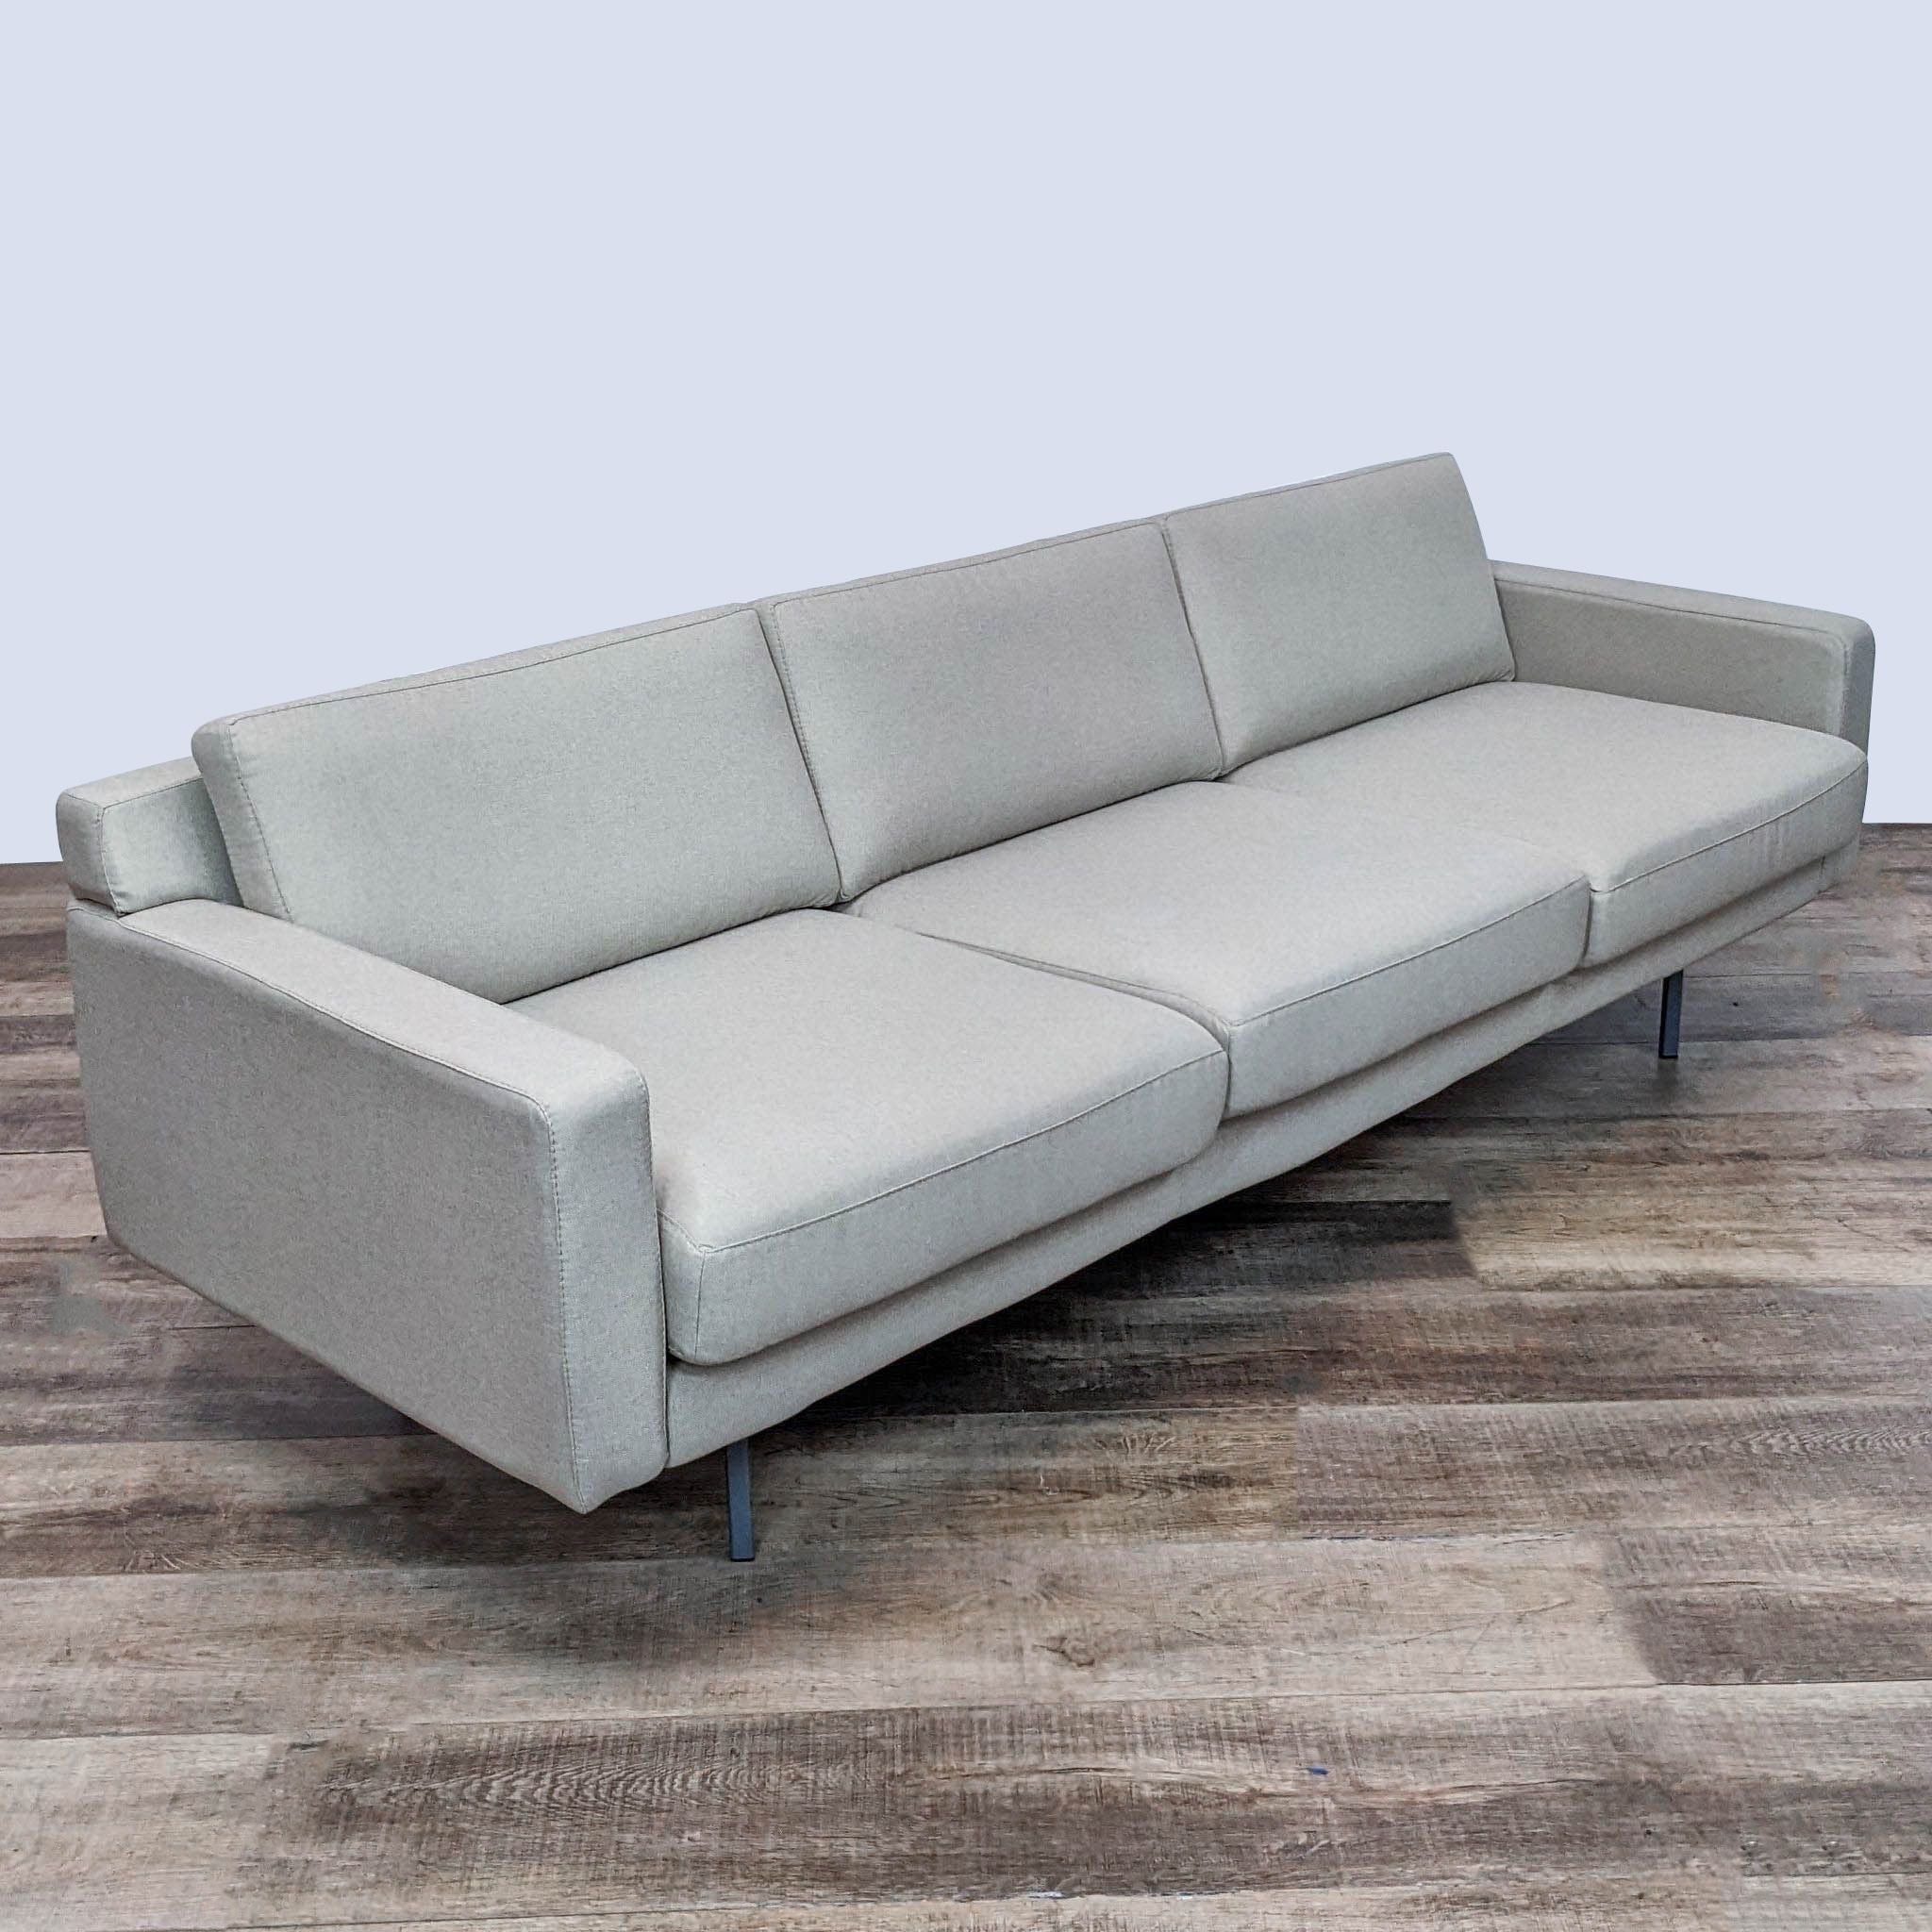 Rowe Furniture 3-seat minimalistic sofa with square arms and metal feet, shown in profile view on wooden floor.